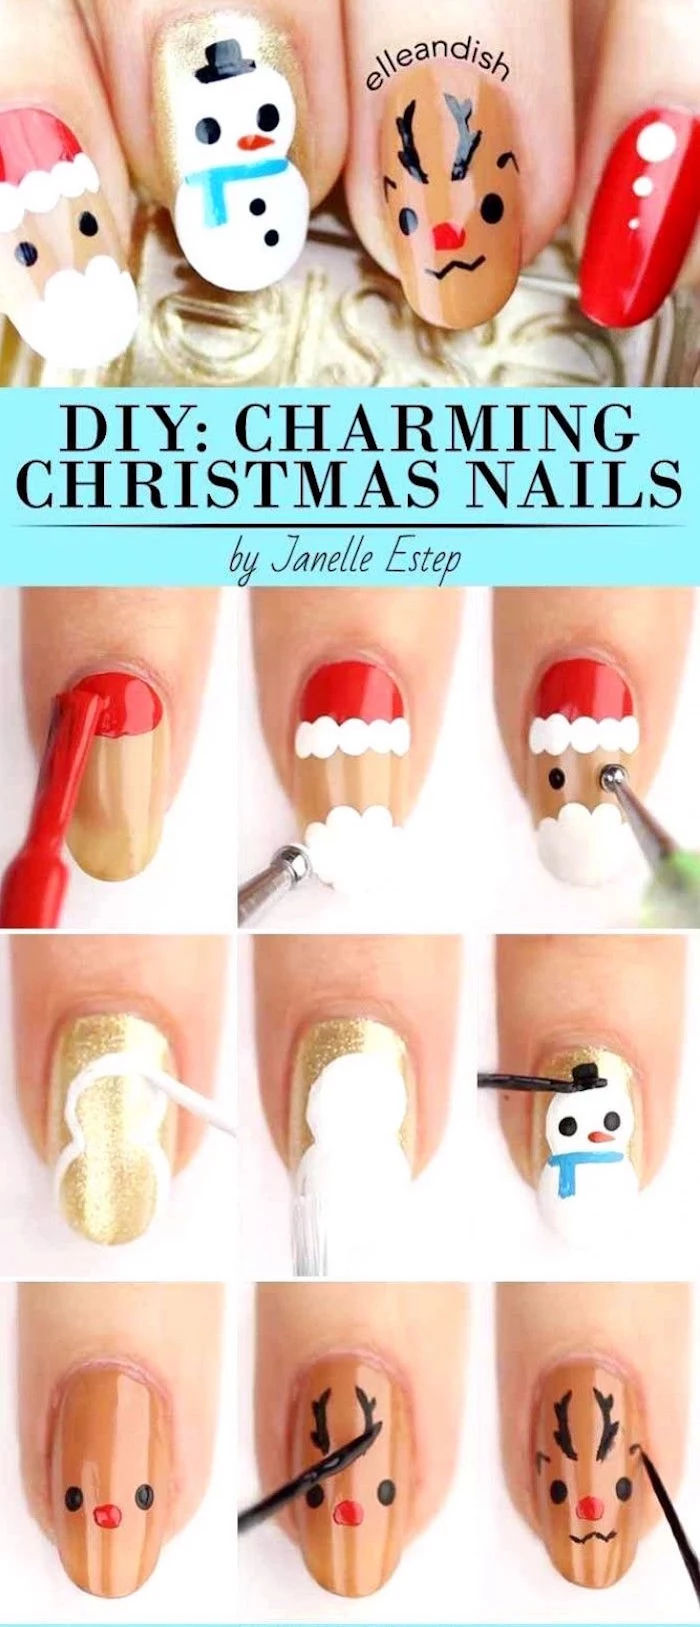 holiday nail designs medium length almond nails with santa snowman and reindeer decorations step by step diy tutorial